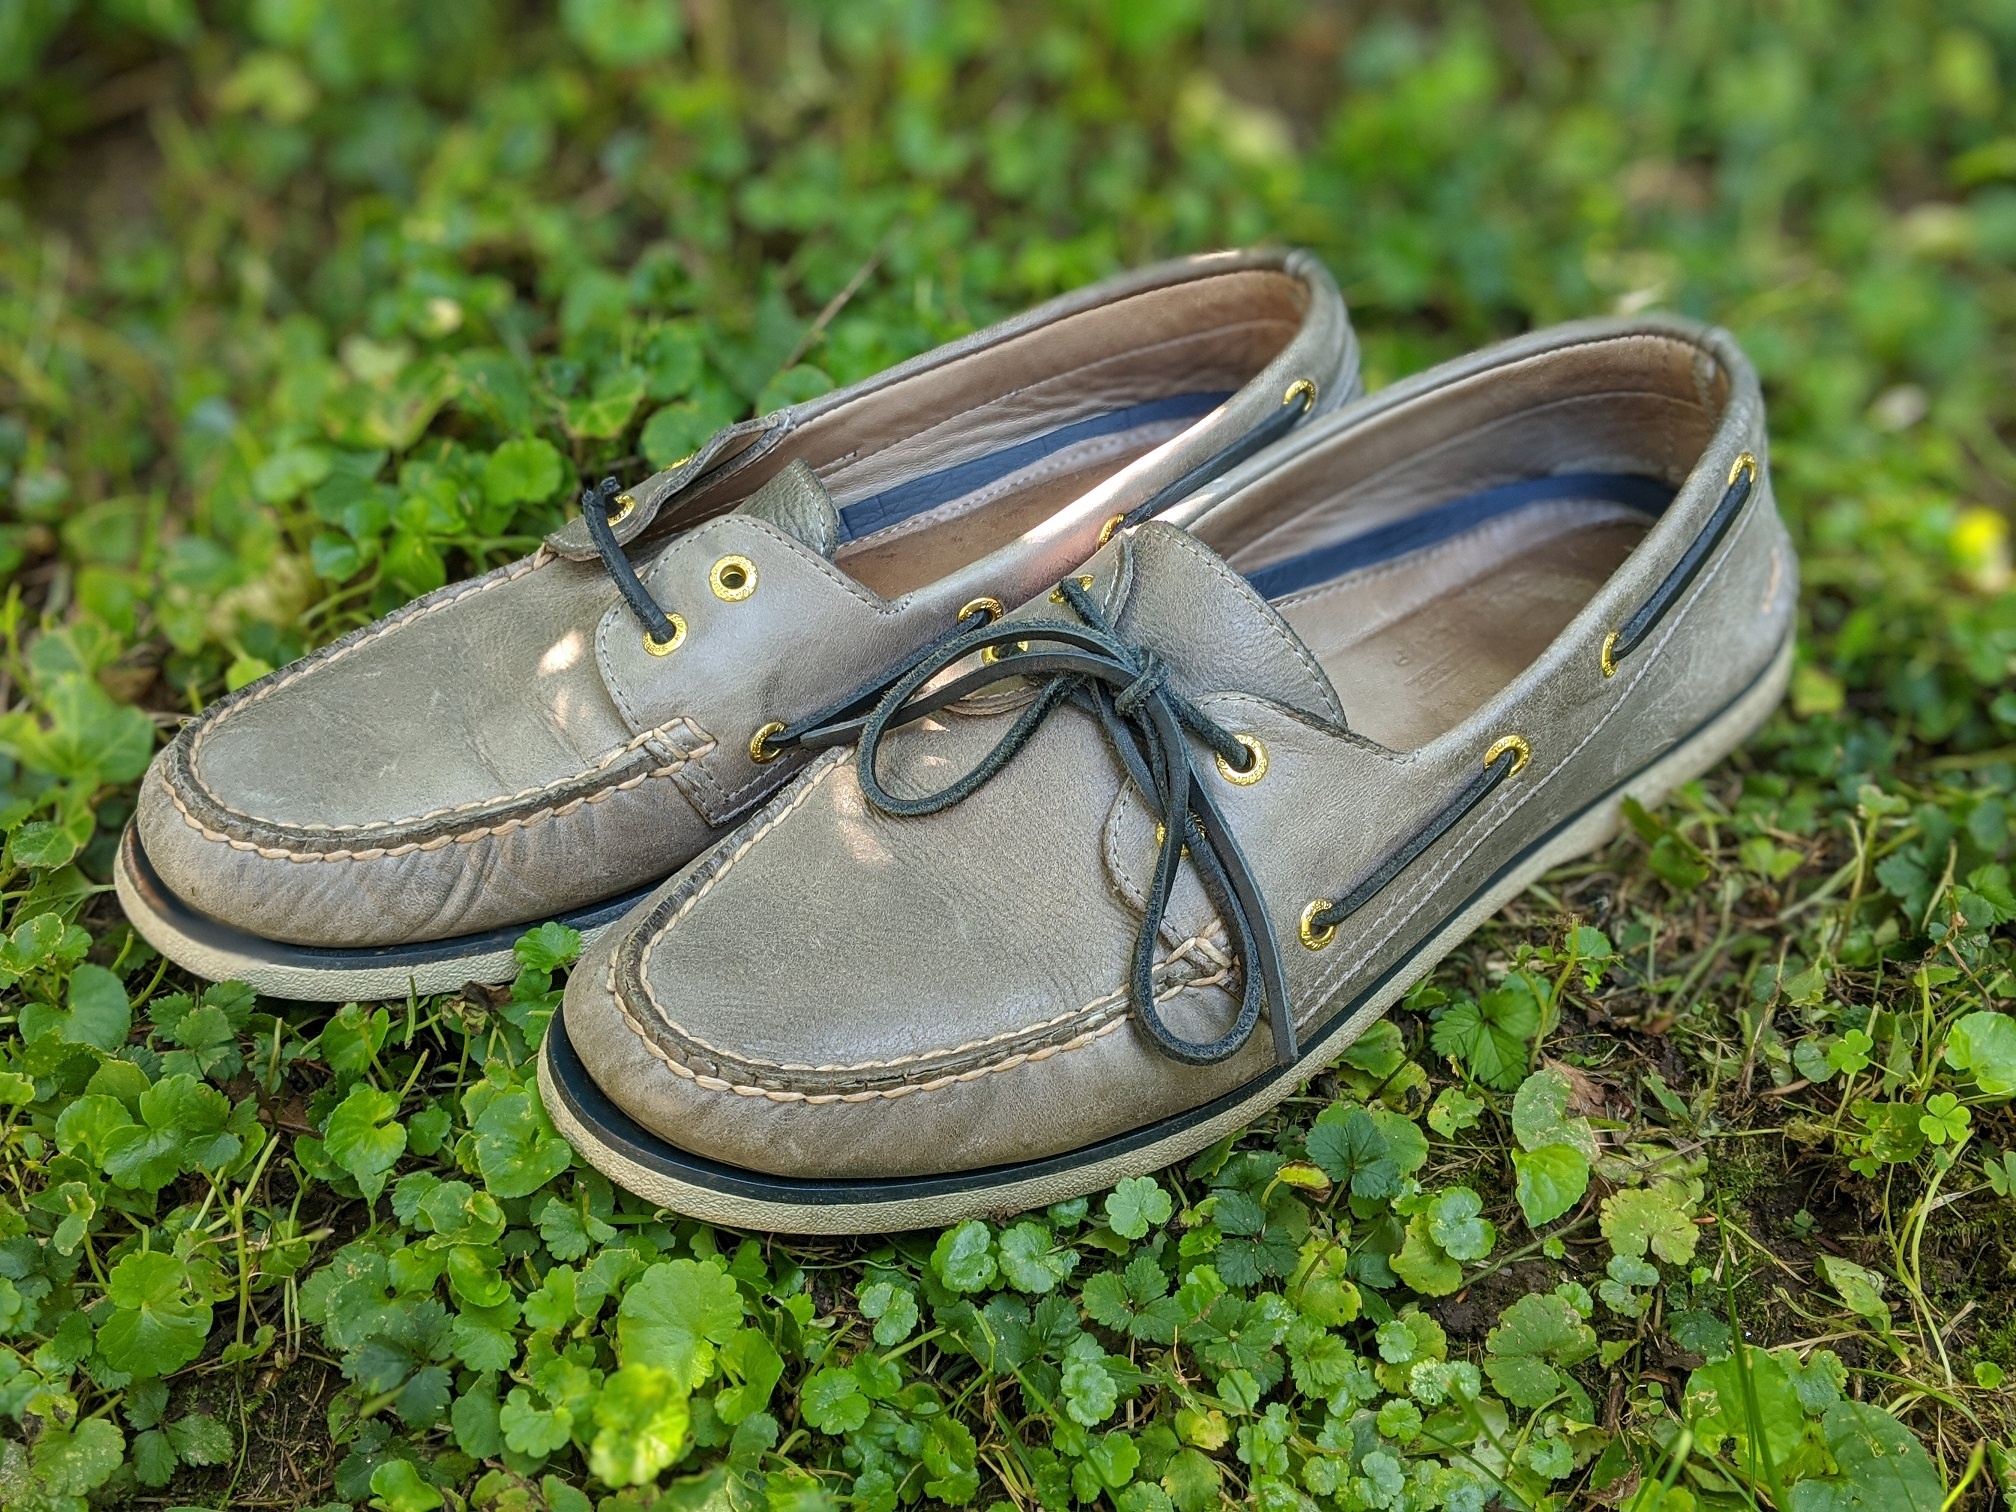 Sperry Top Sider Gold Cup: Five Year Review